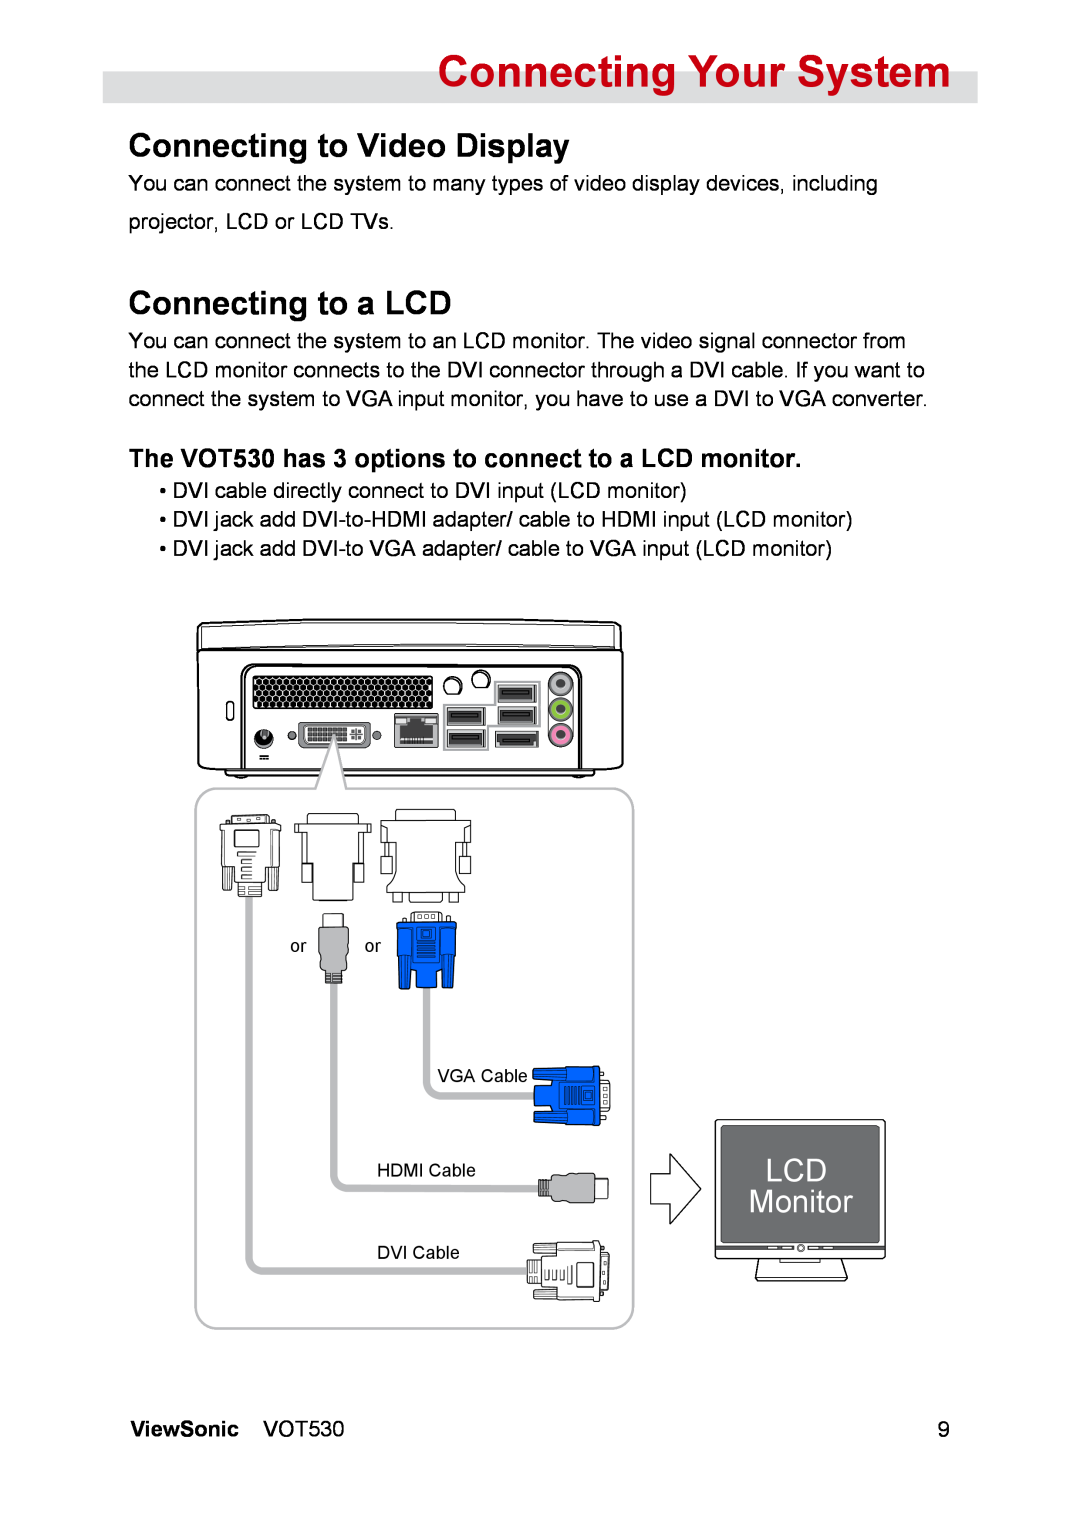 ViewSonic VS12661 Connecting to Video Display, Connecting to a LCD, The VOT530 has 3 options to connect to a LCD monitor 